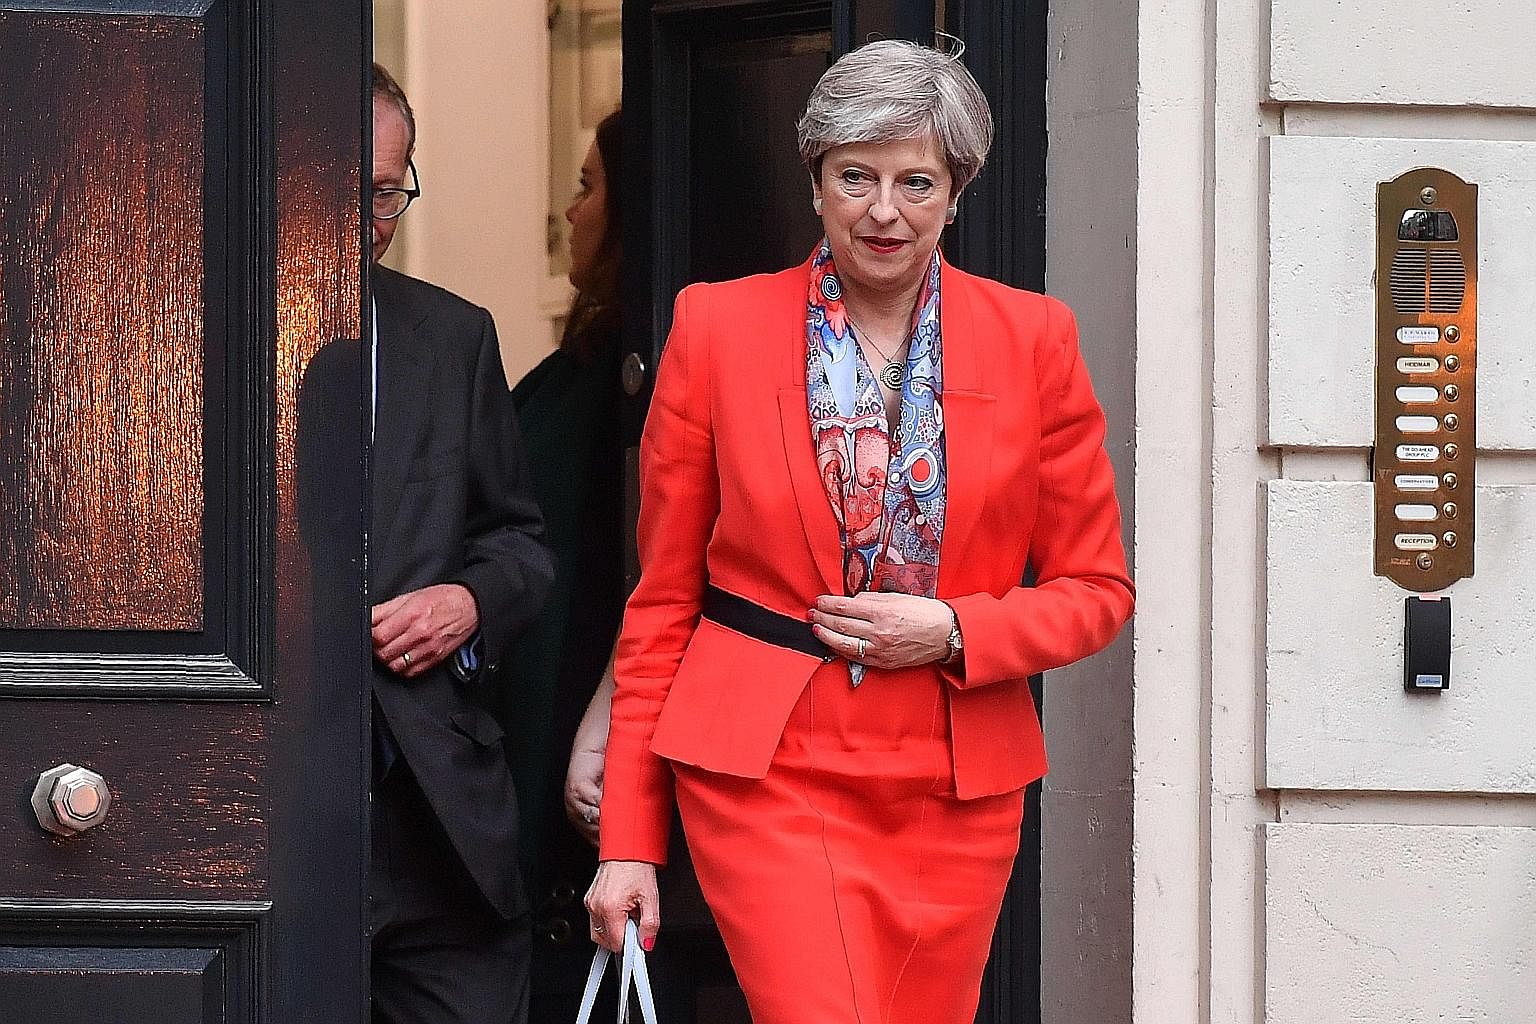 Mrs Theresa May leaving the Conservative Party HQ in London yesterday, hours after the polls closed in the British general election.